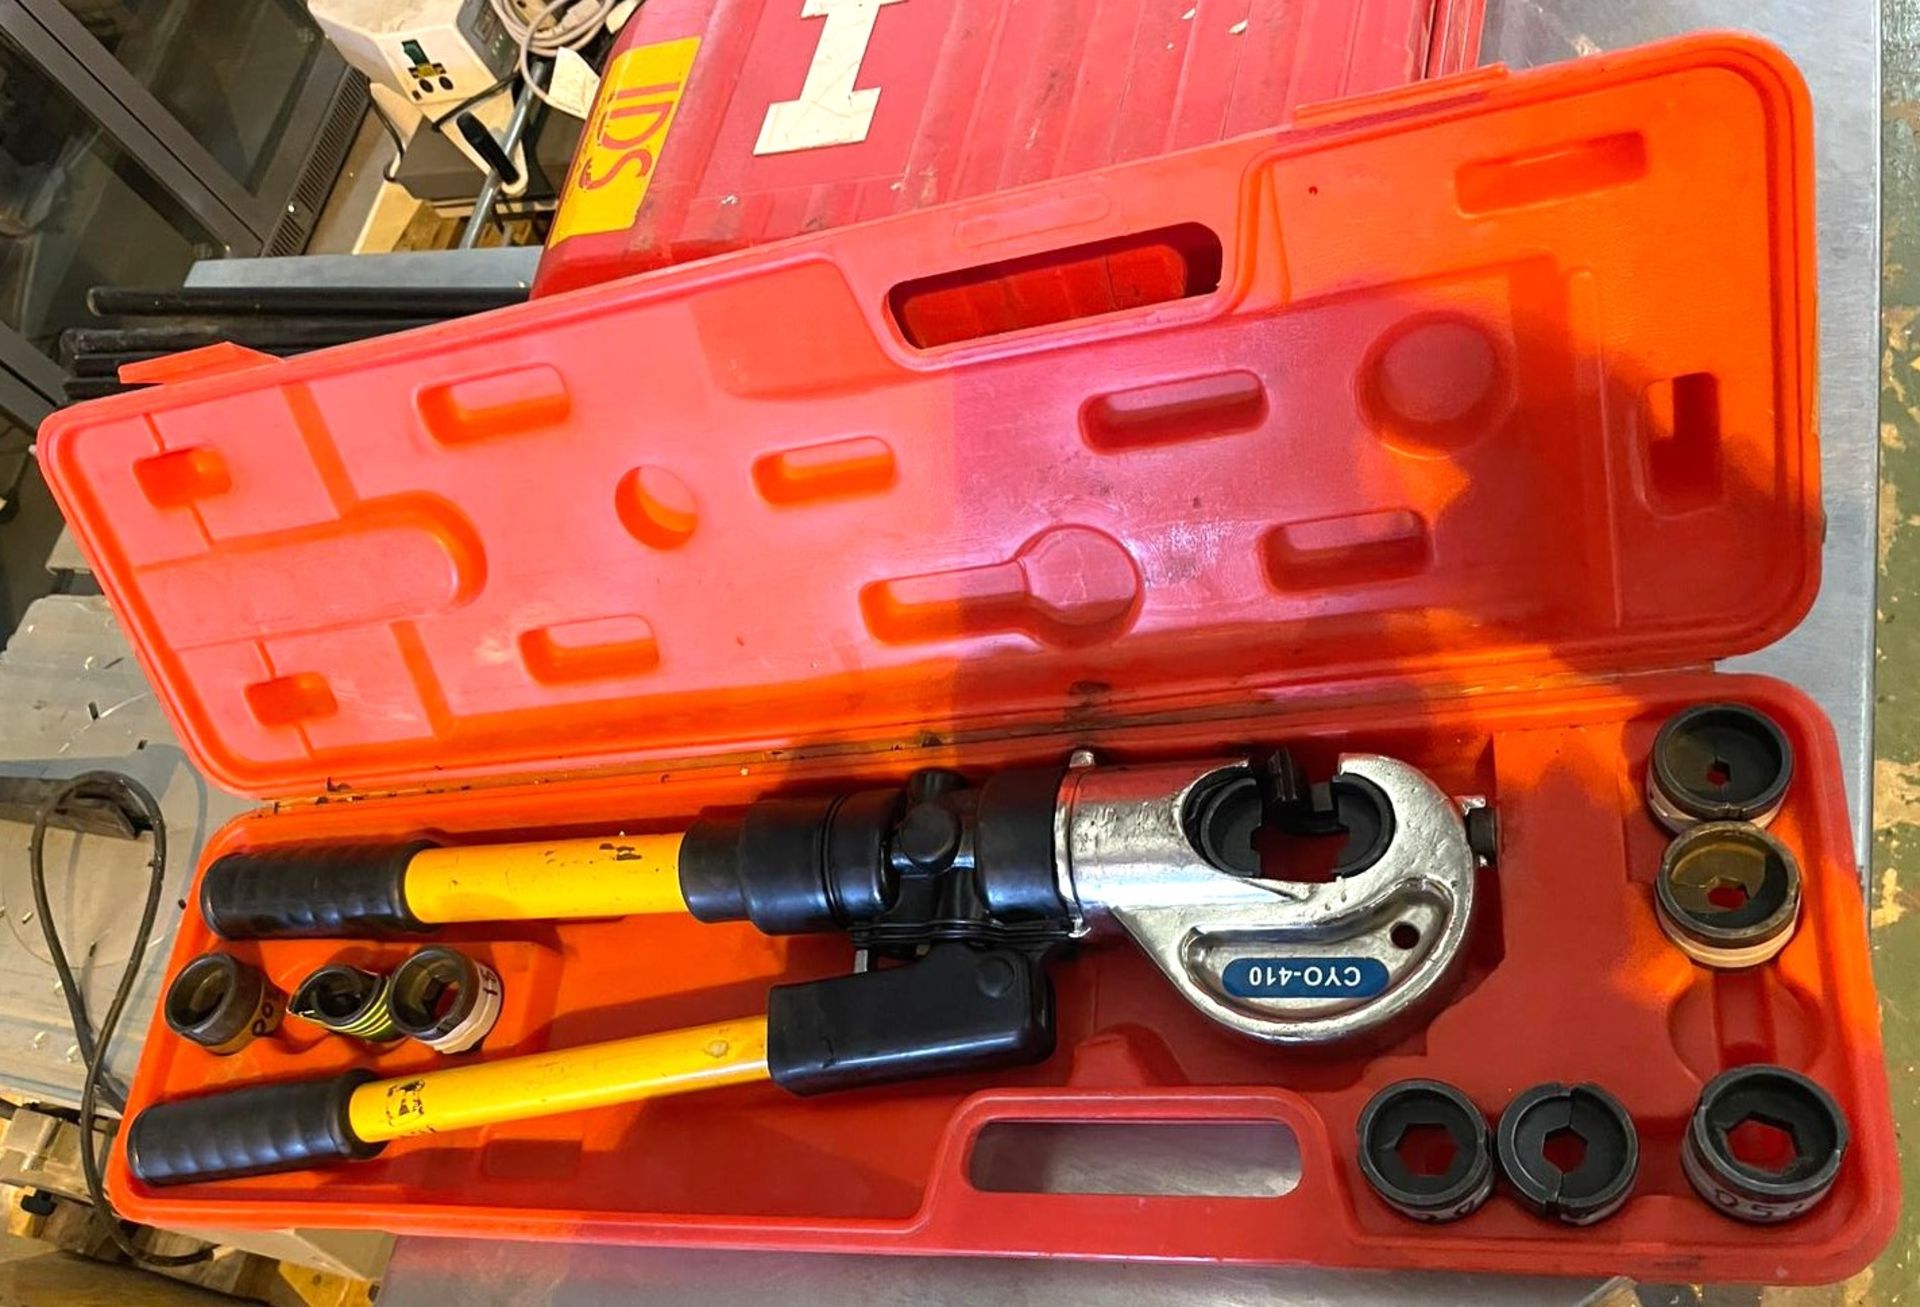 1 x Manual Hydraulic Crimping Tool - Type: CYO-410 - Includes Case and Accessories - RRP £750 - Image 10 of 11